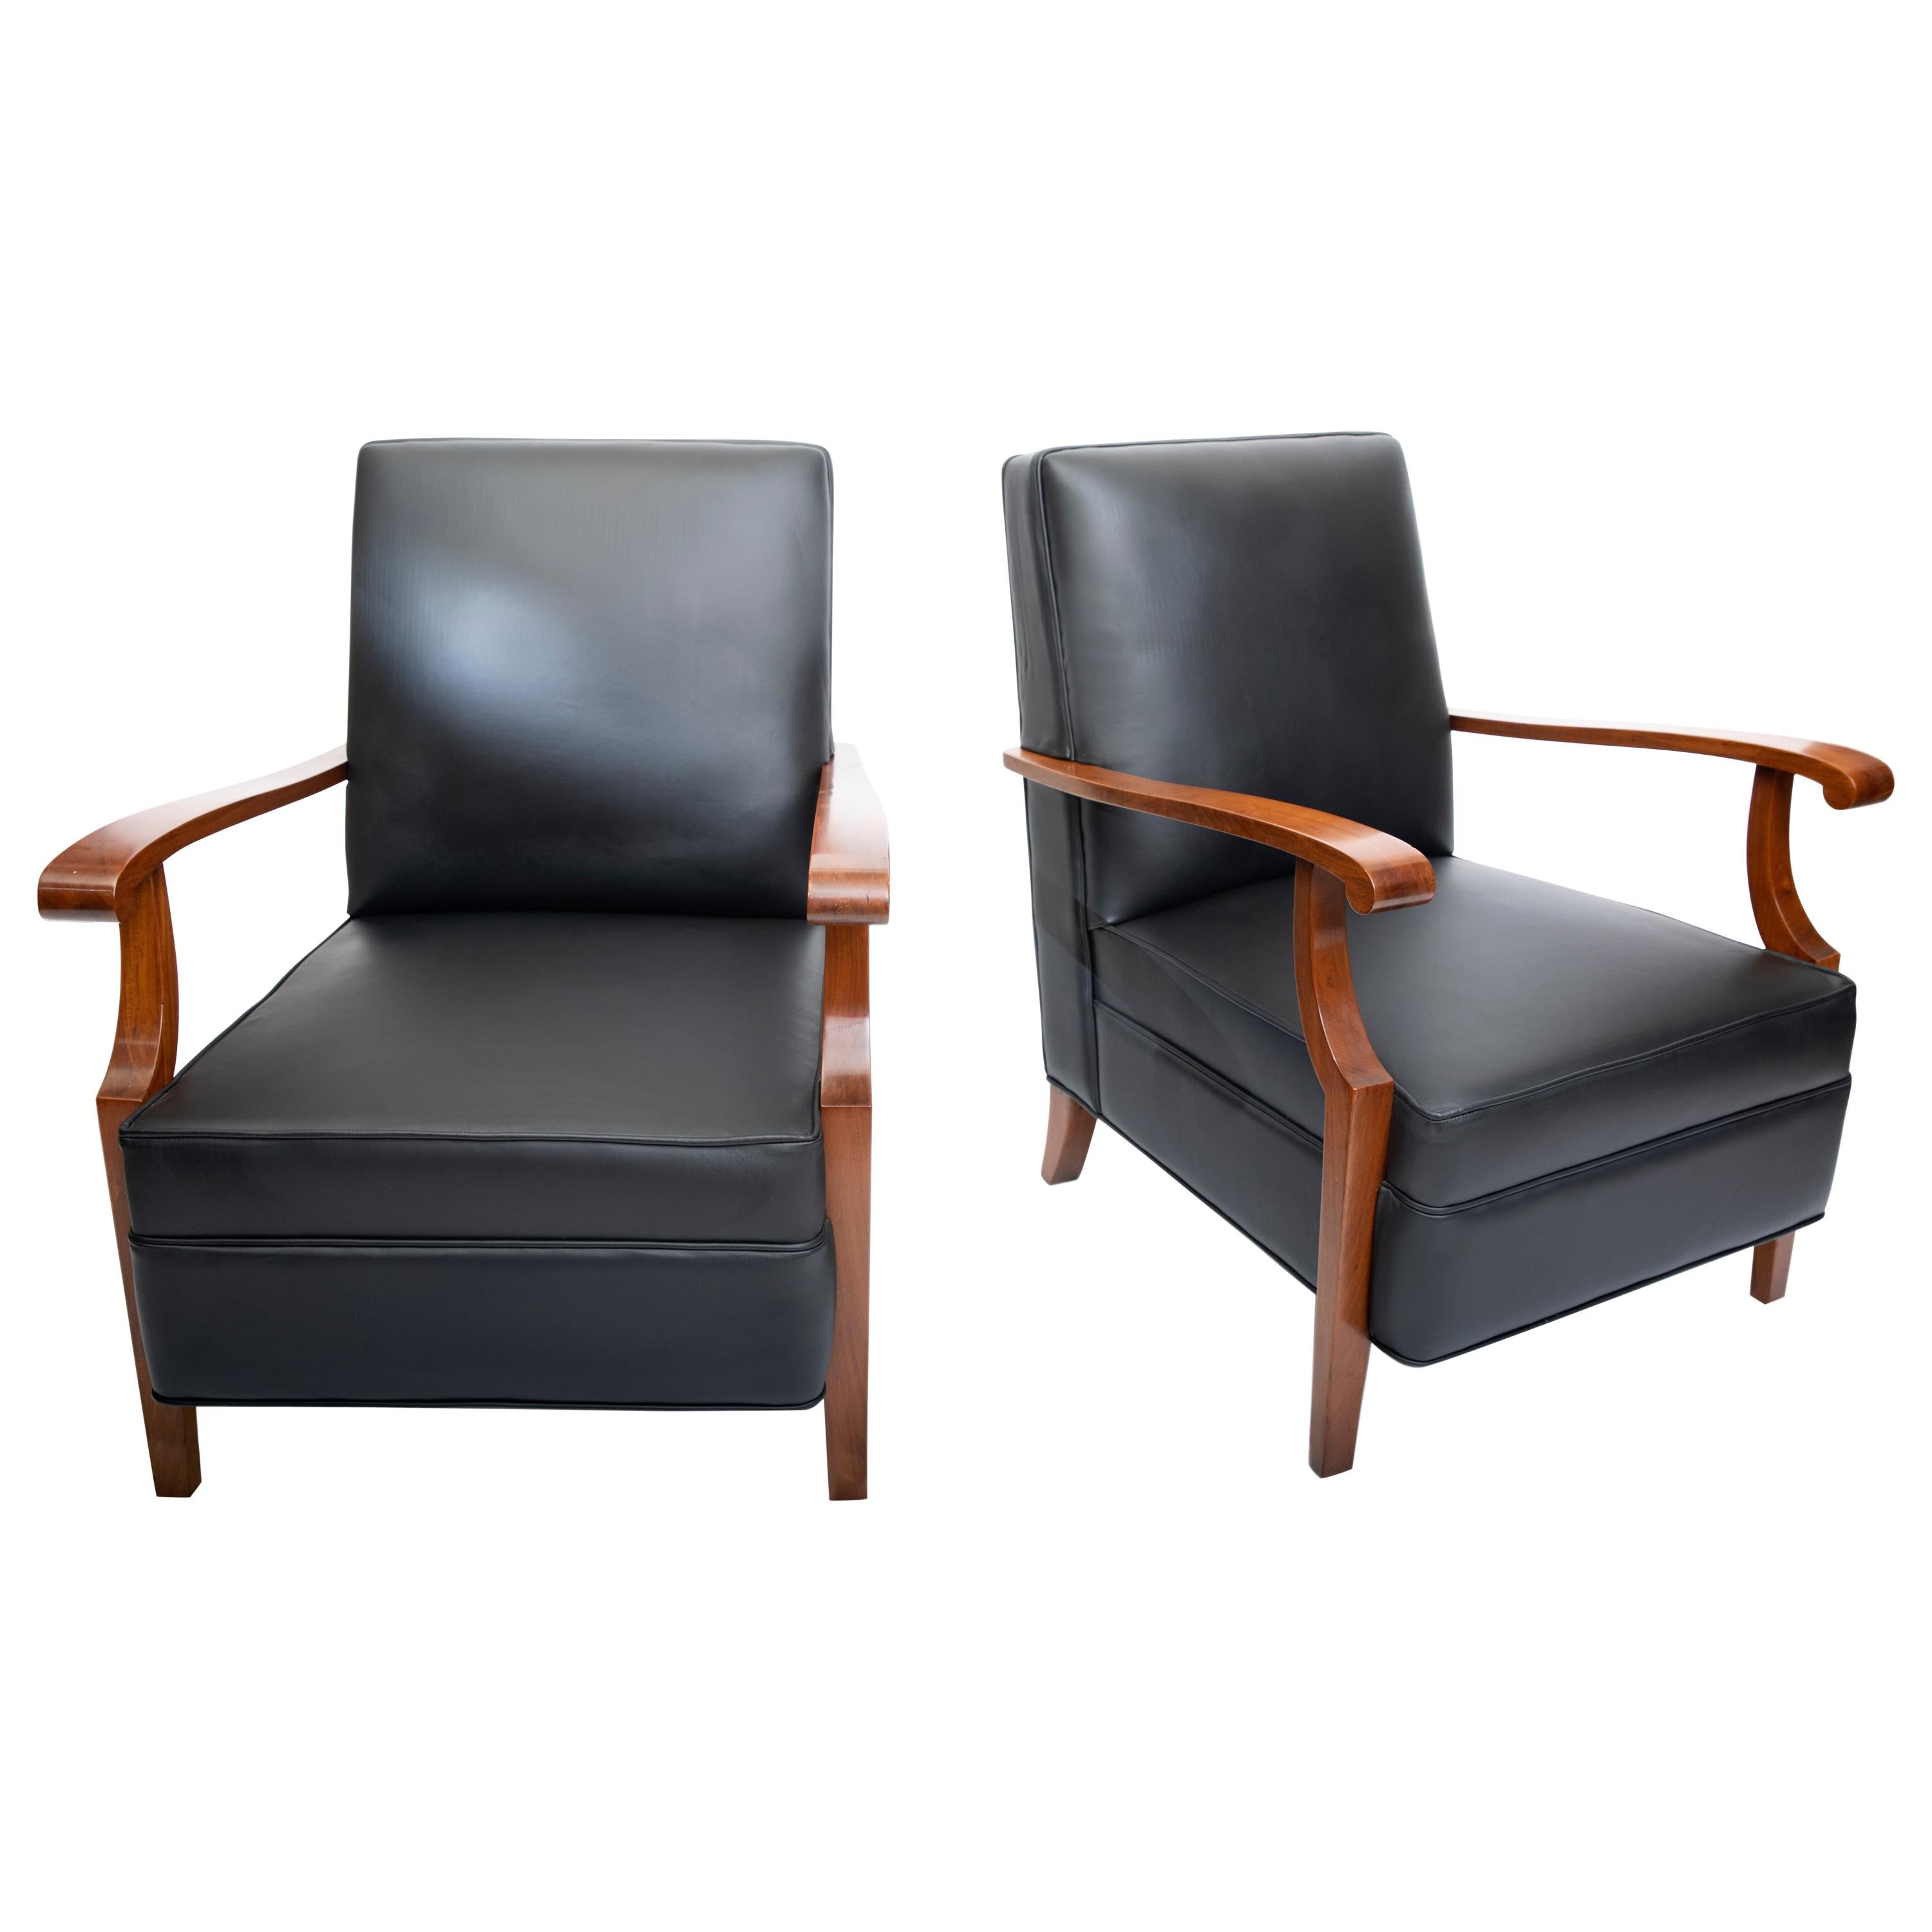 Pair of Leather and Wood Armchairs by Comte, Argentina, Buenos Aires, circa 1940 For Sale